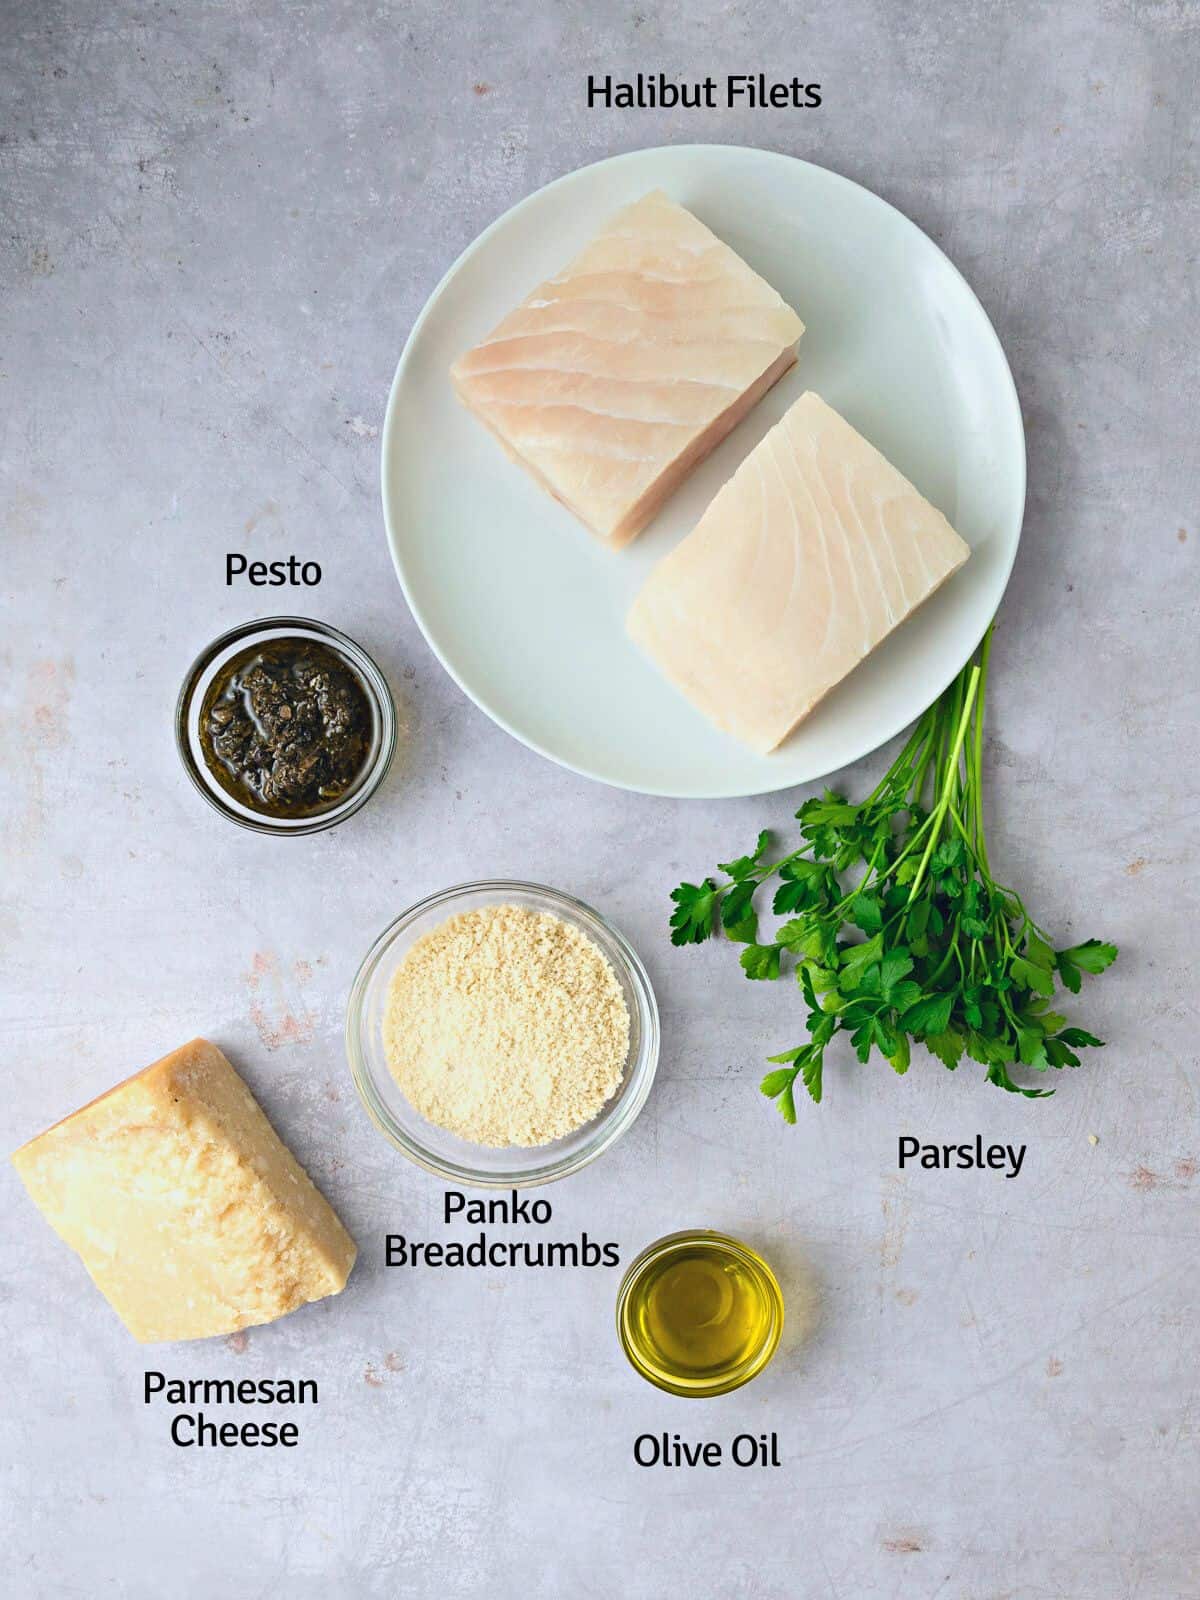 Ingredients for panko crusted halibut, including pesto, Parmesan cheese, olive oil and fresh parsley.